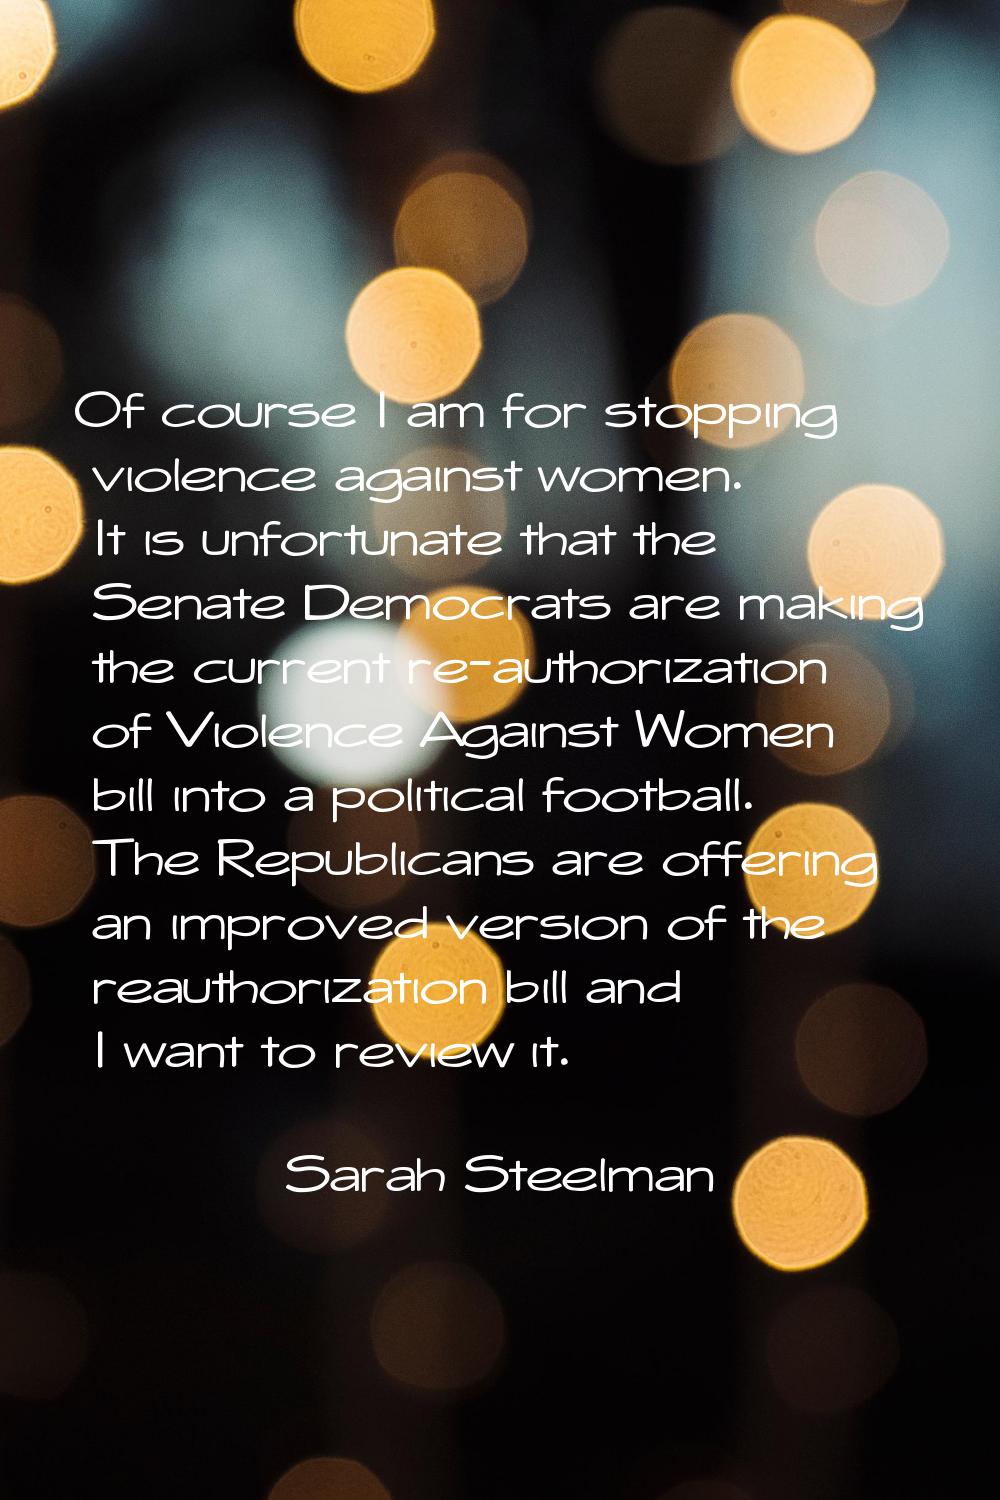 Of course I am for stopping violence against women. It is unfortunate that the Senate Democrats are